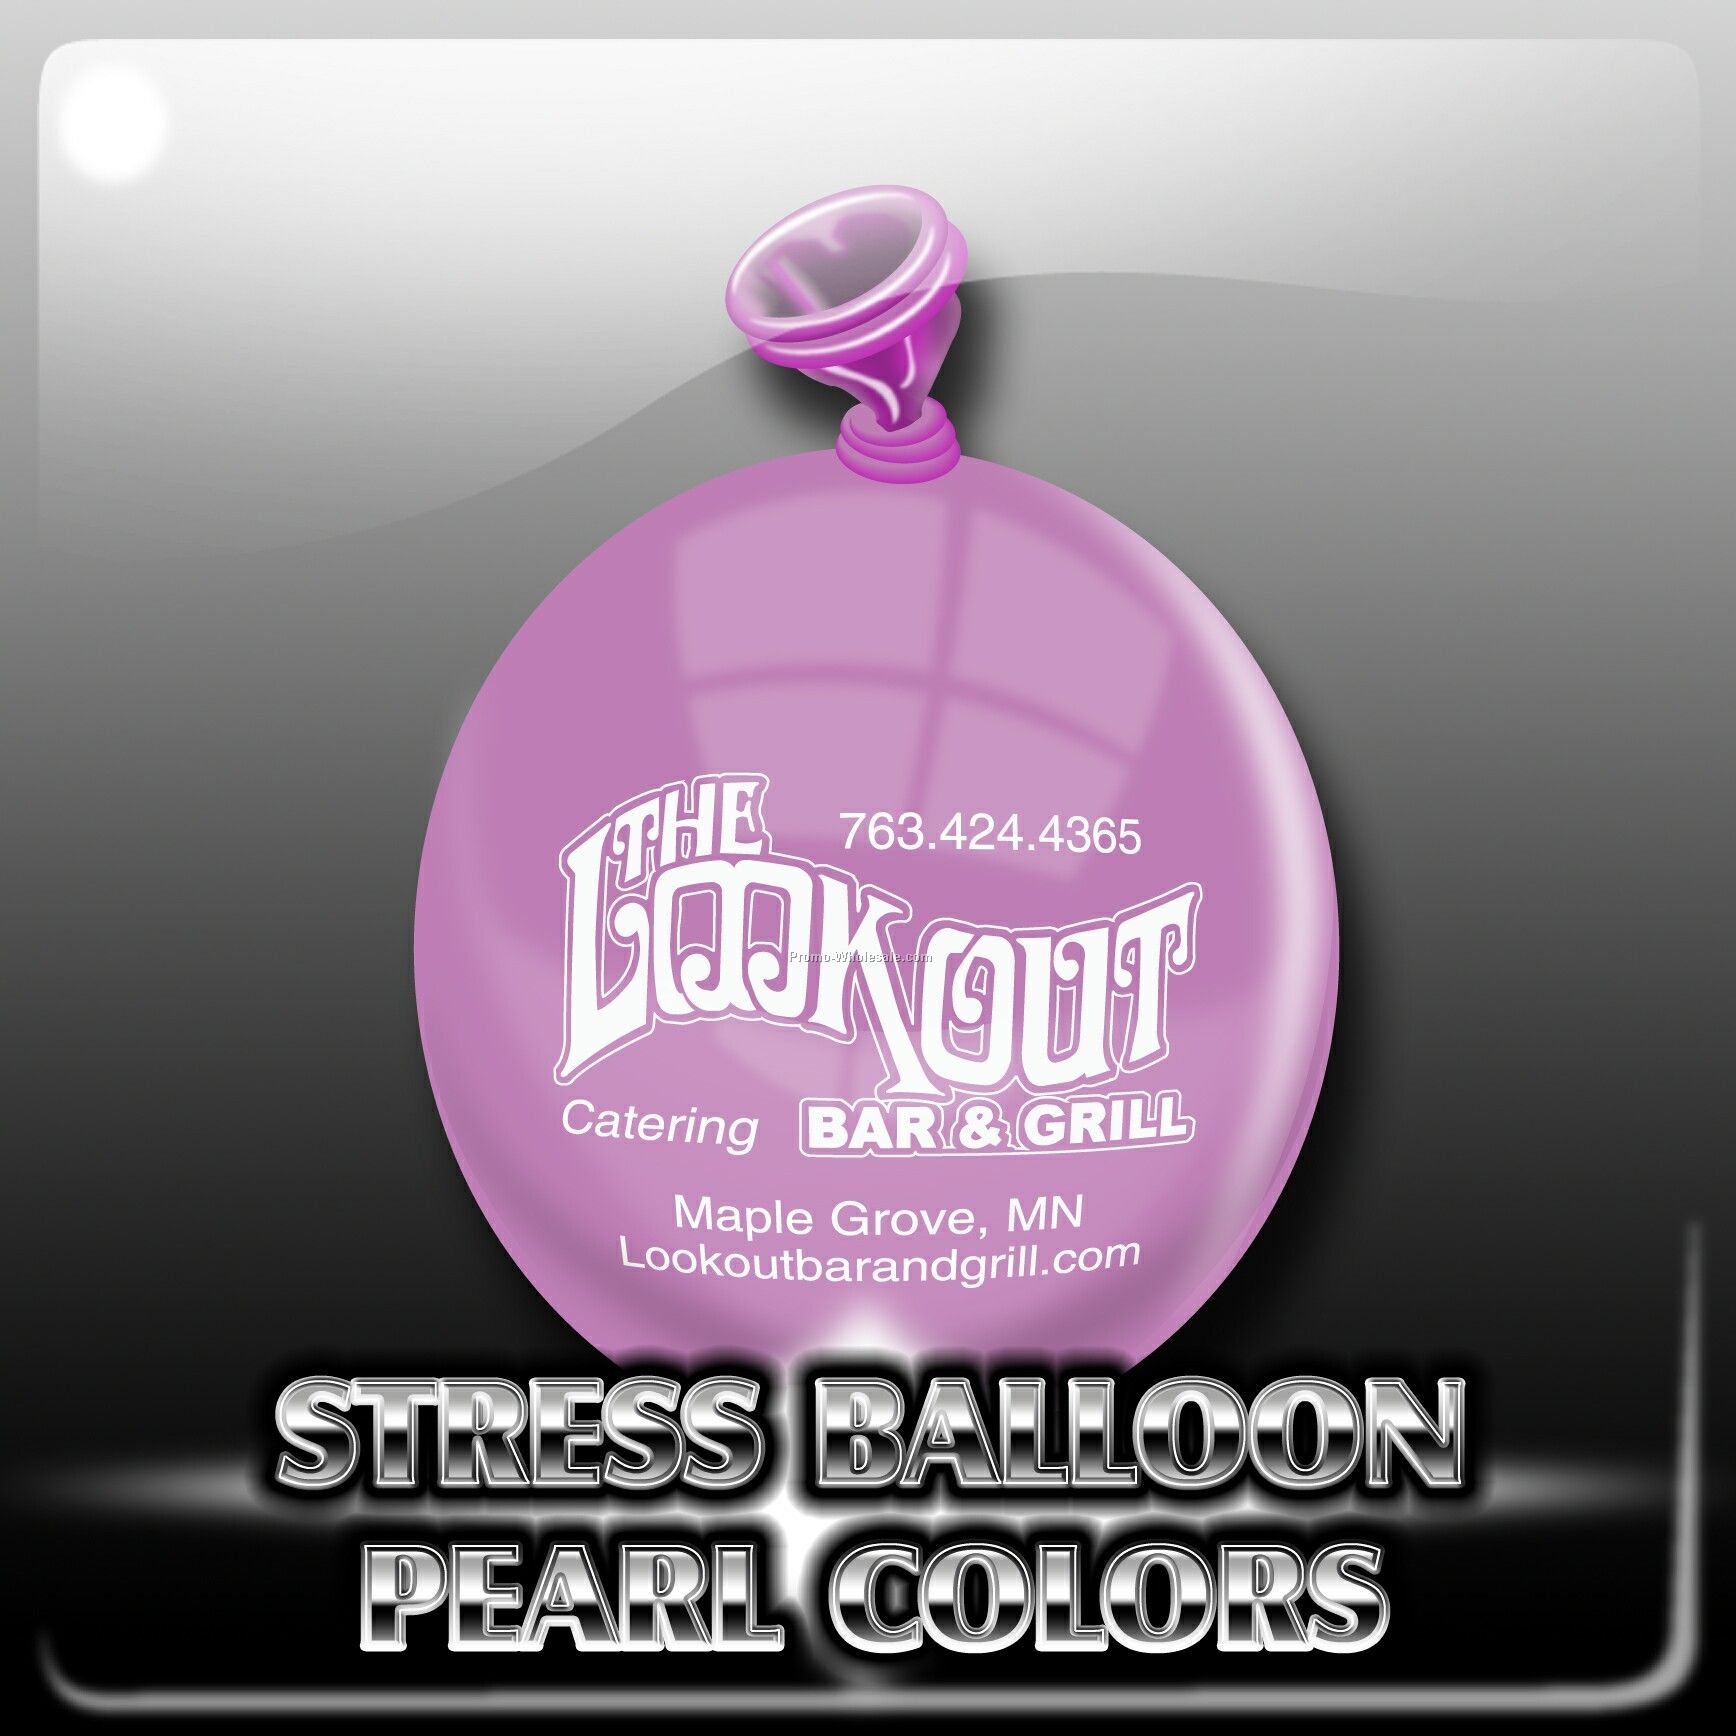 Double Strength Stress Balloon - Pearl Colors